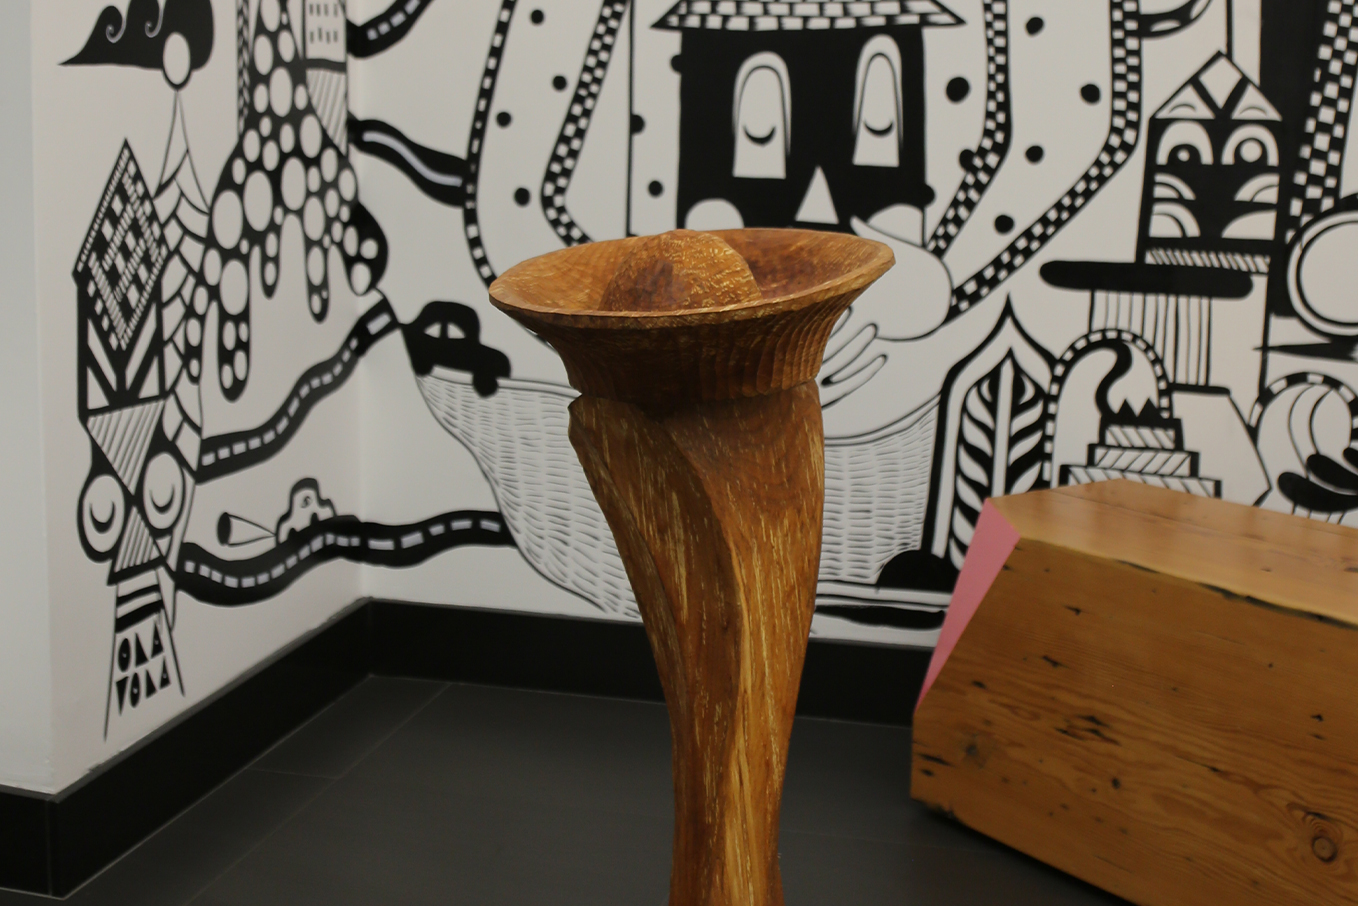 Travis Skinner's completed artifact, Justice Bowl, displayed in the reception area of the hcma Vancouver office.